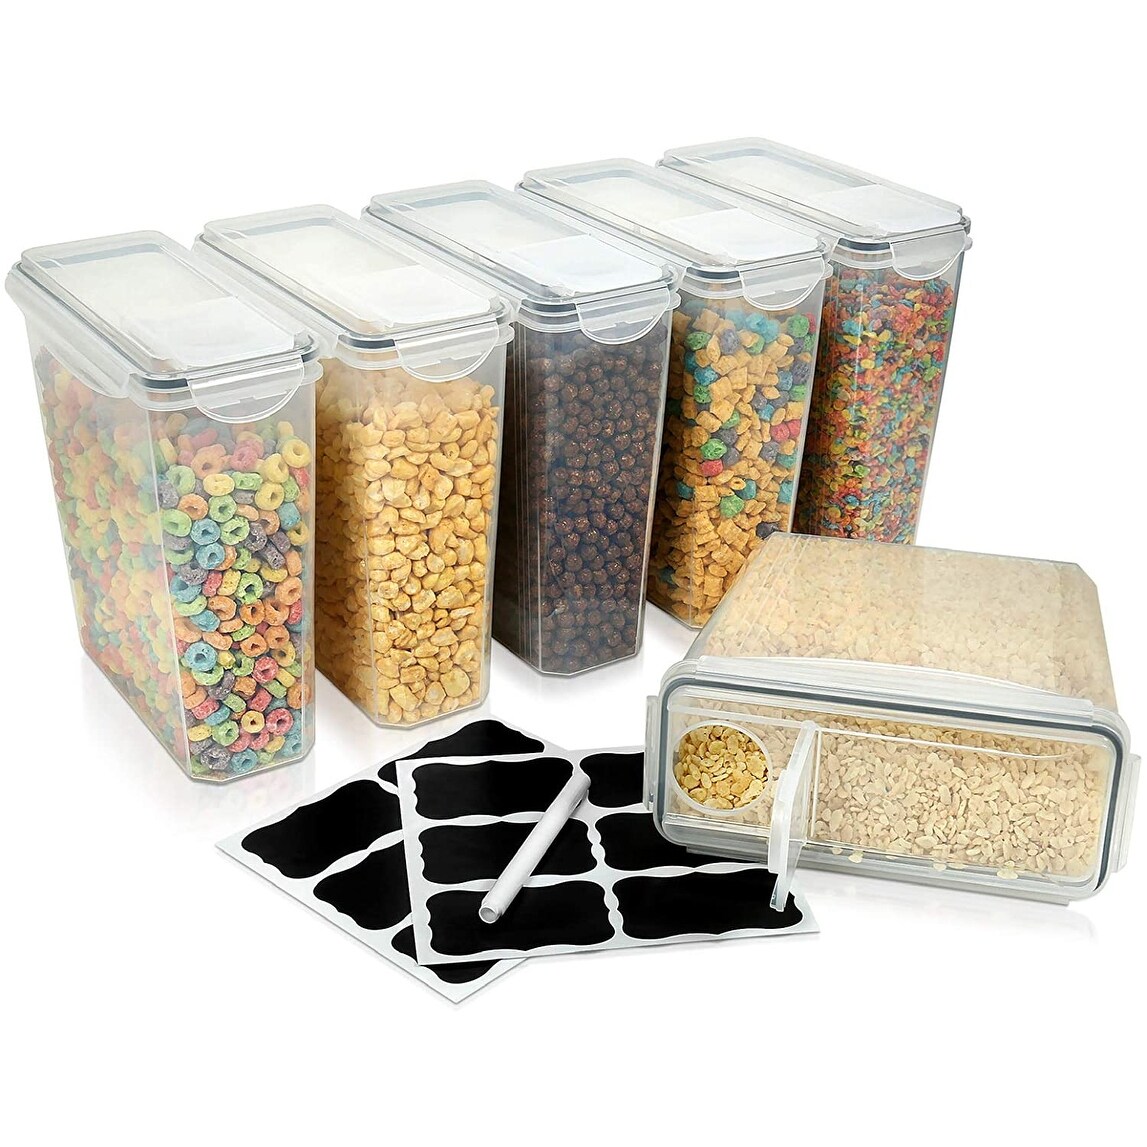 6 Pack Cereal Container Storage Set - Bed Bath & Beyond - 33704007